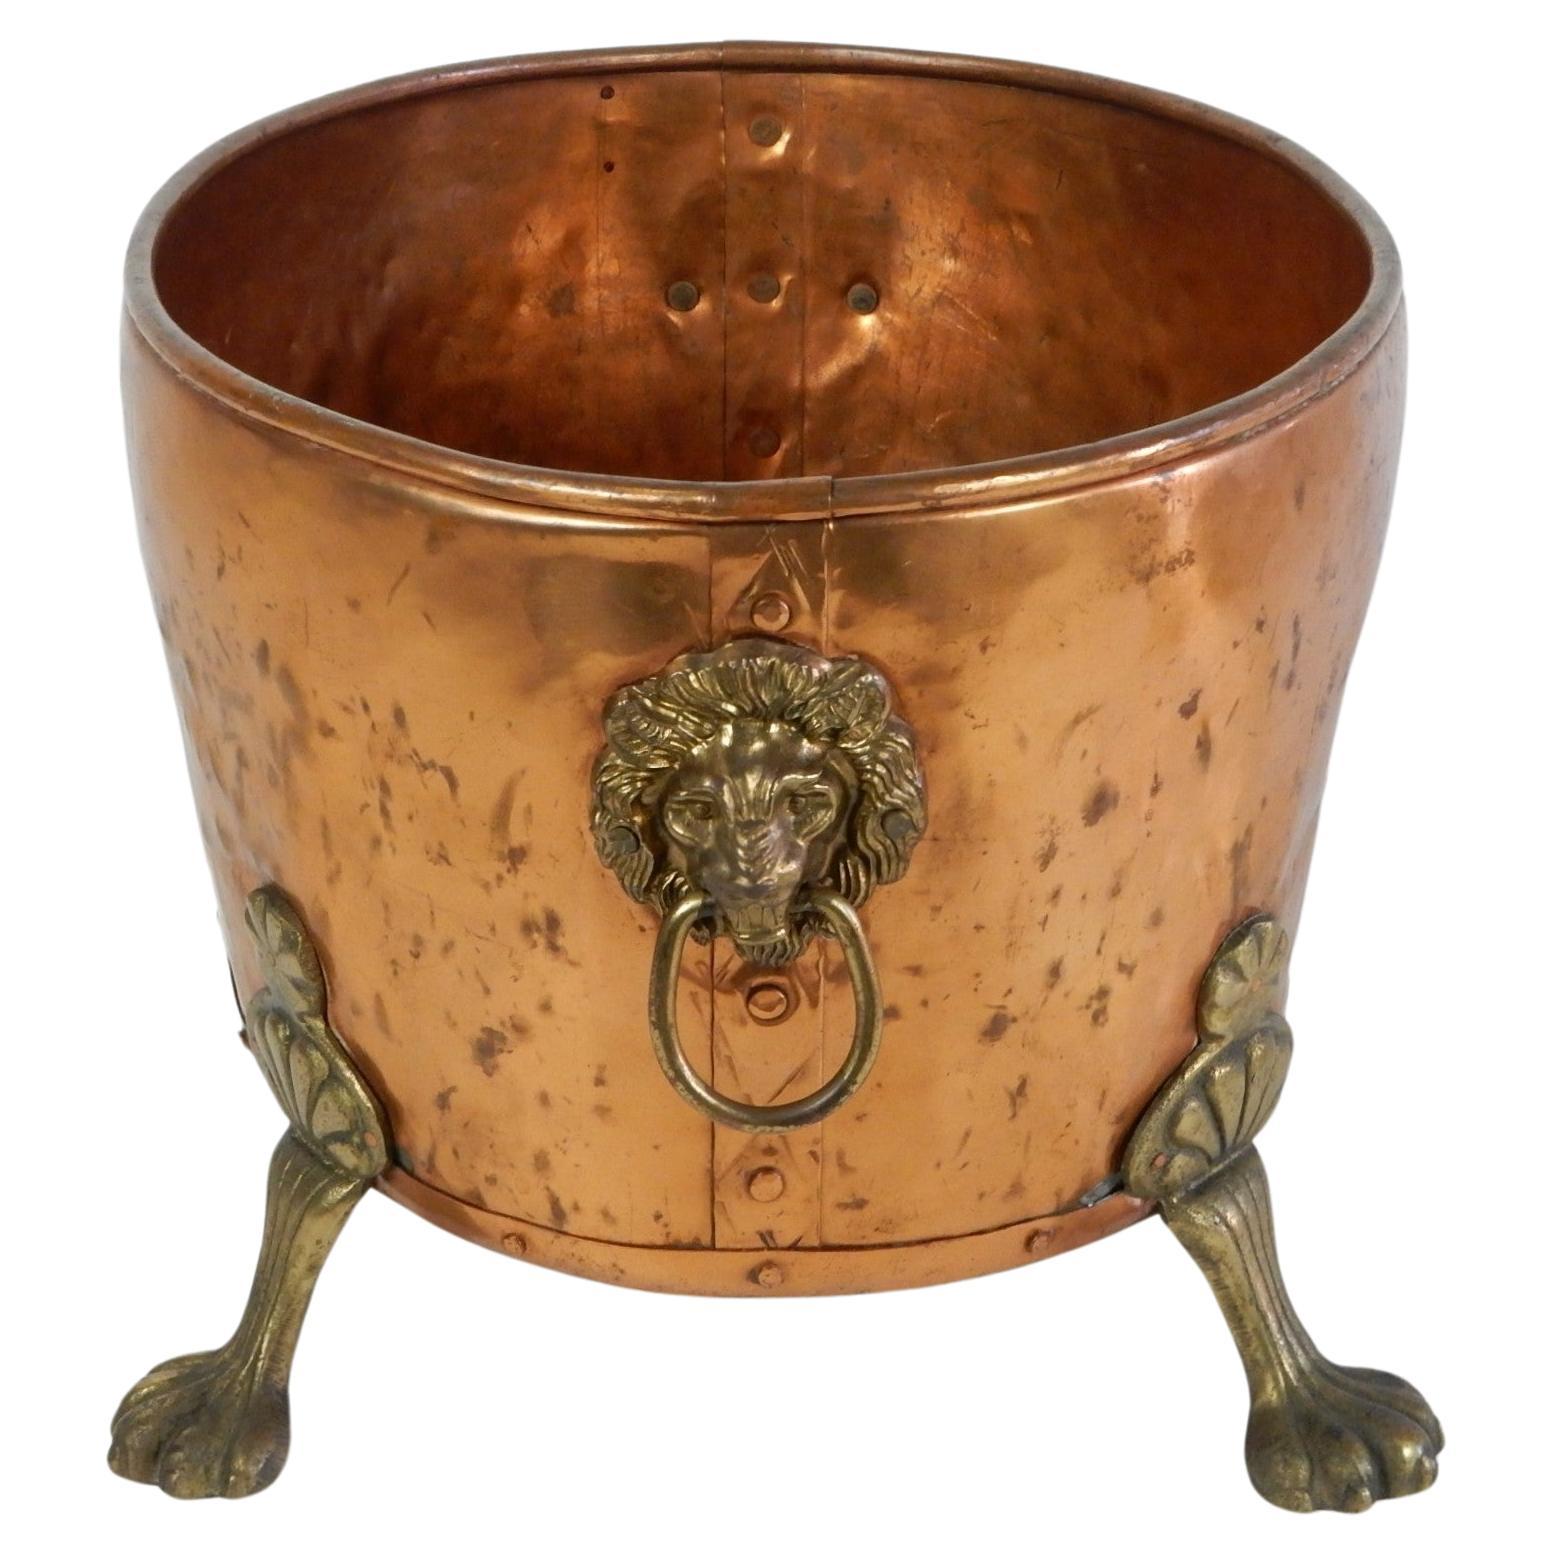 Baroque Revival 19th Century English Hammered Copper & Brass Claw Footed Lion Log Bin Planter For Sale